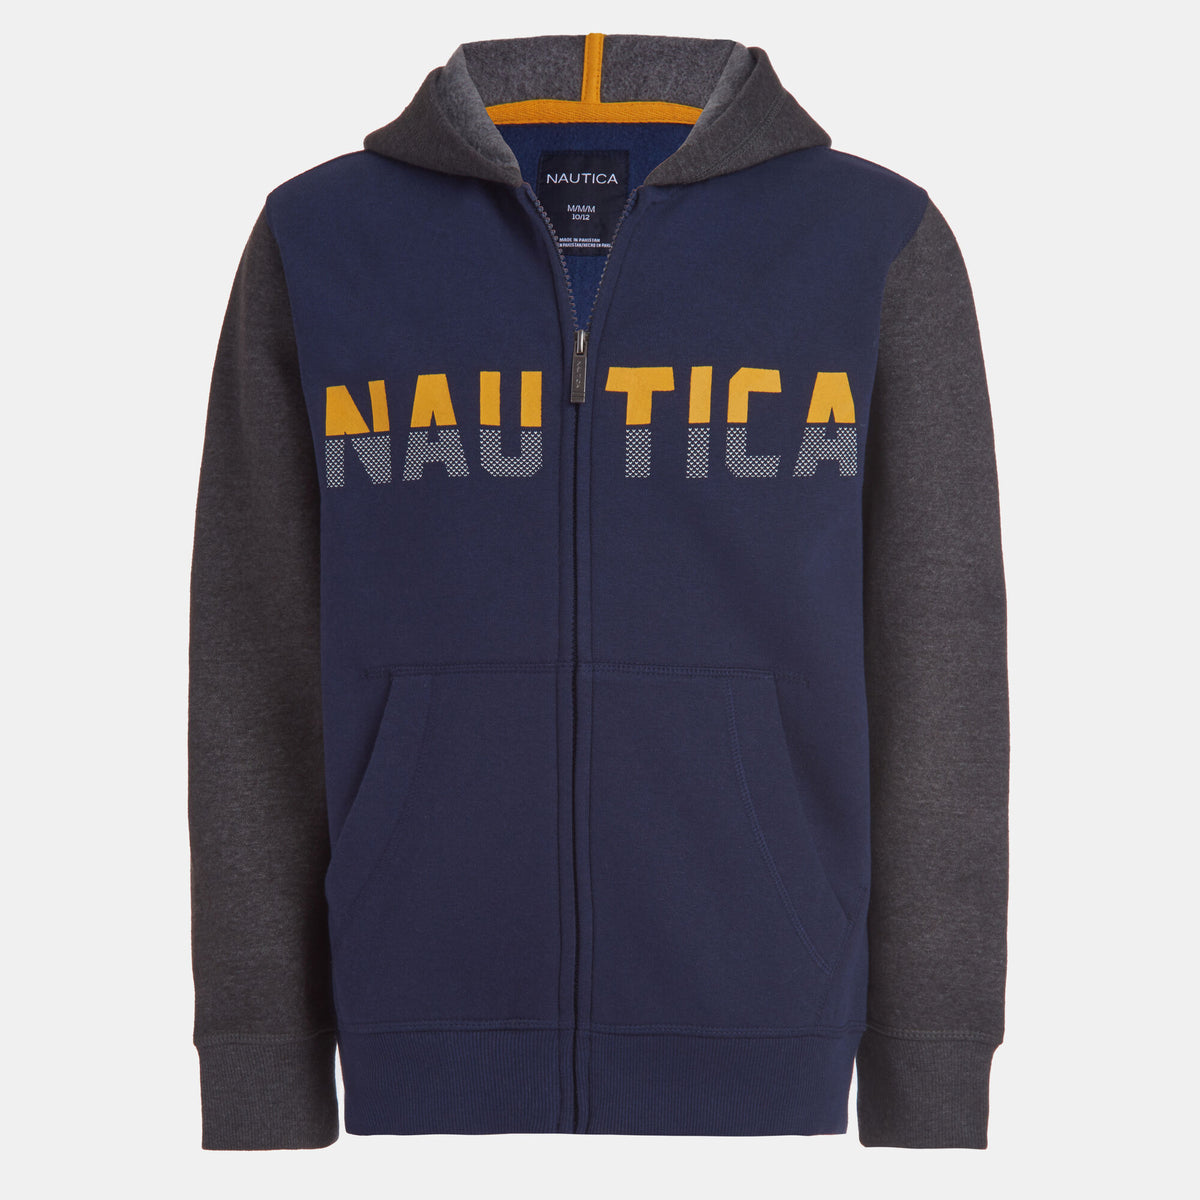 Nautica Toddler Boys' Colorblock Logo Full-Zip Hoodie (2T-4T) Oyster Bay Blue